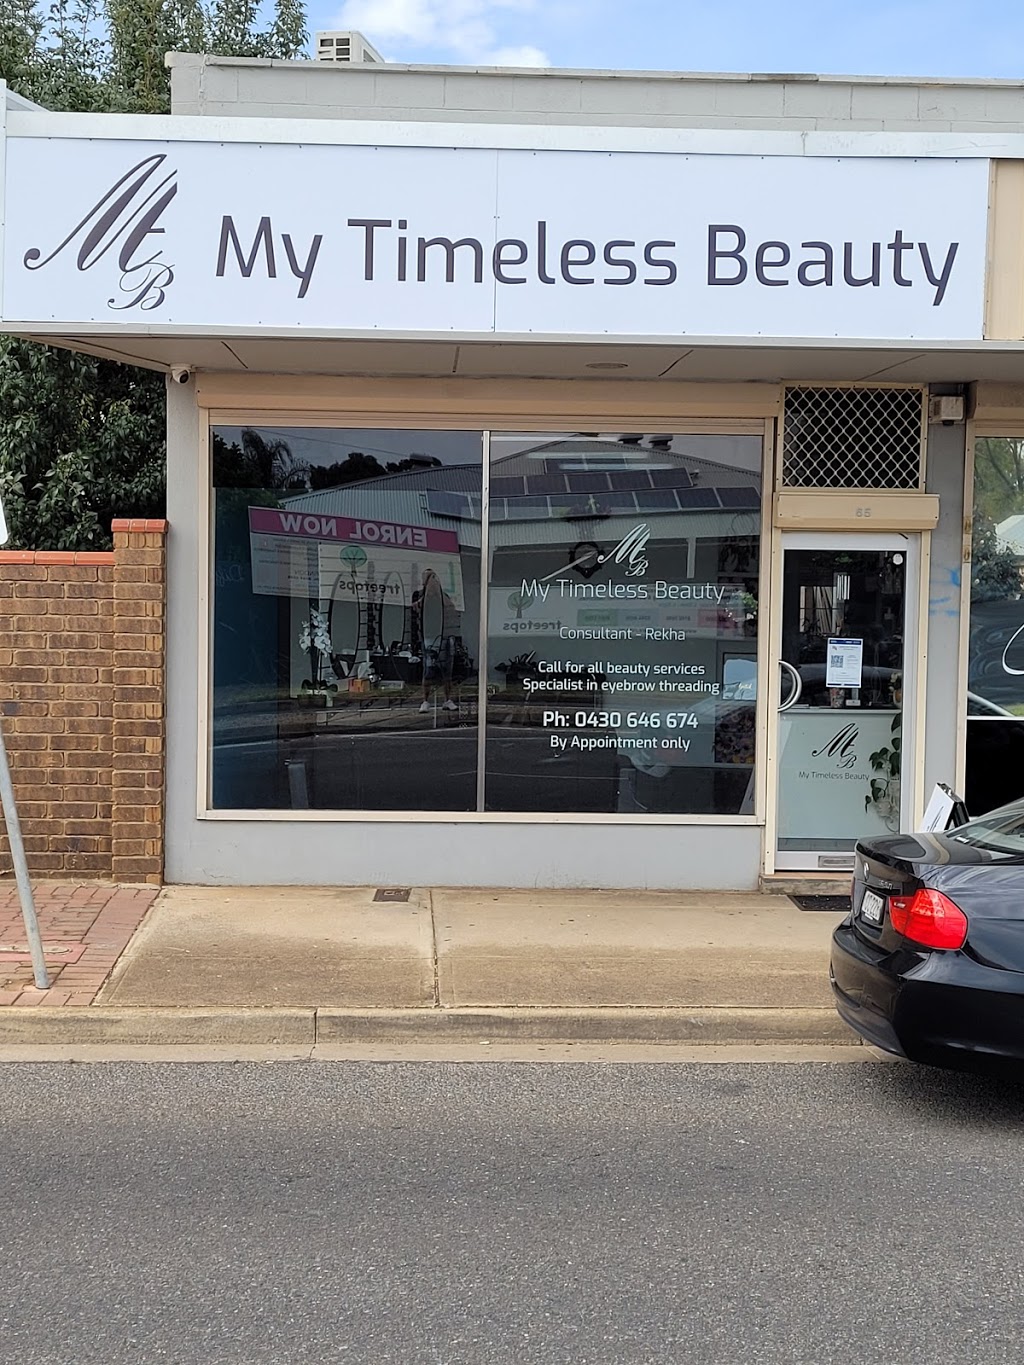 My timeless beauty | 65 Findon Rd, Woodville South SA 5011, Australia | Phone: 0430 646 674